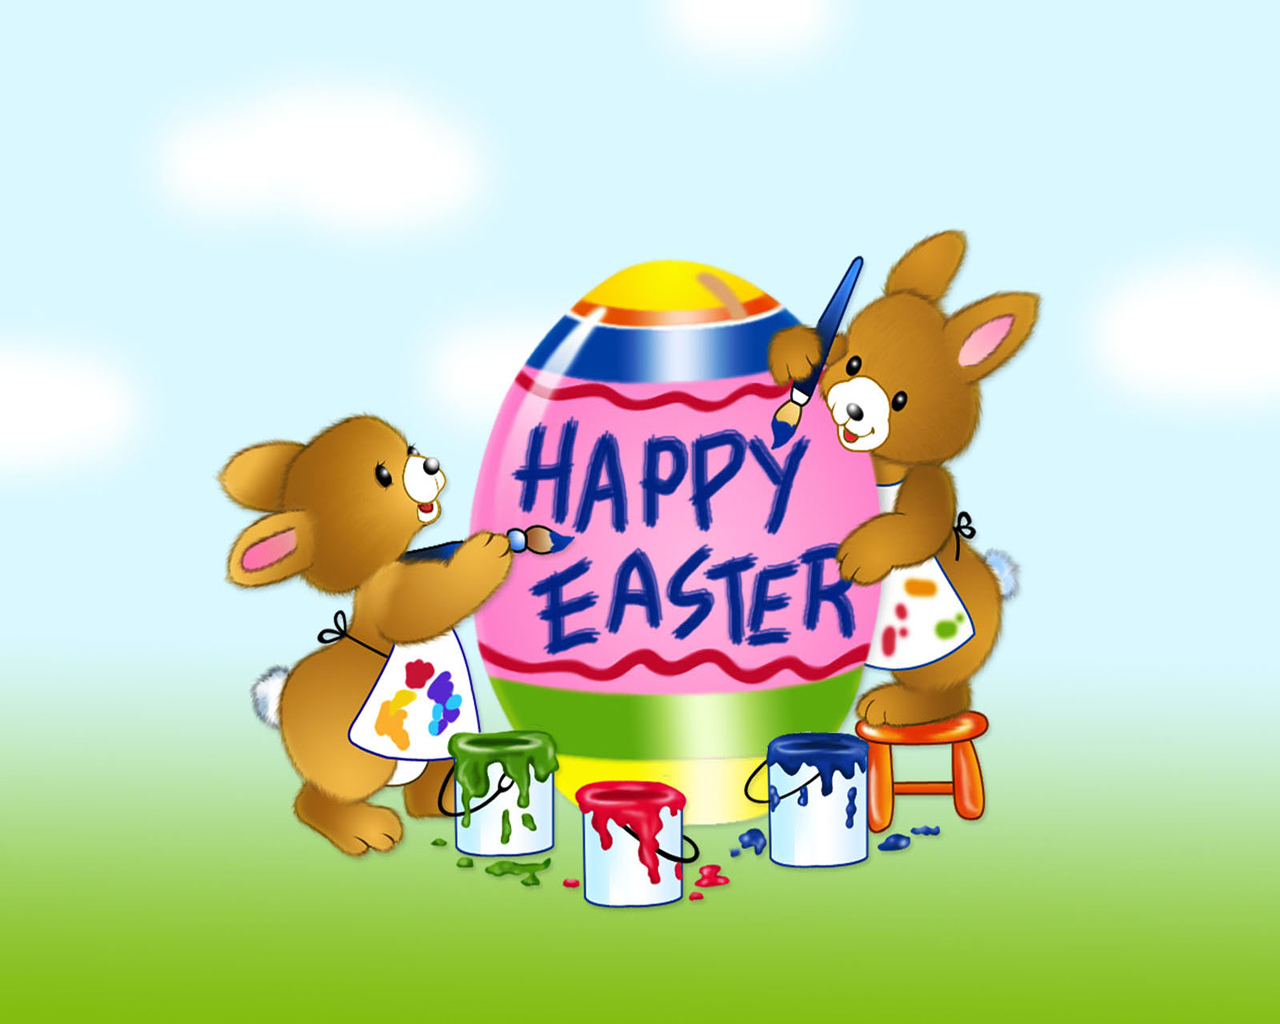 WISHING YOU A HAPPY AND SAFE EASTER